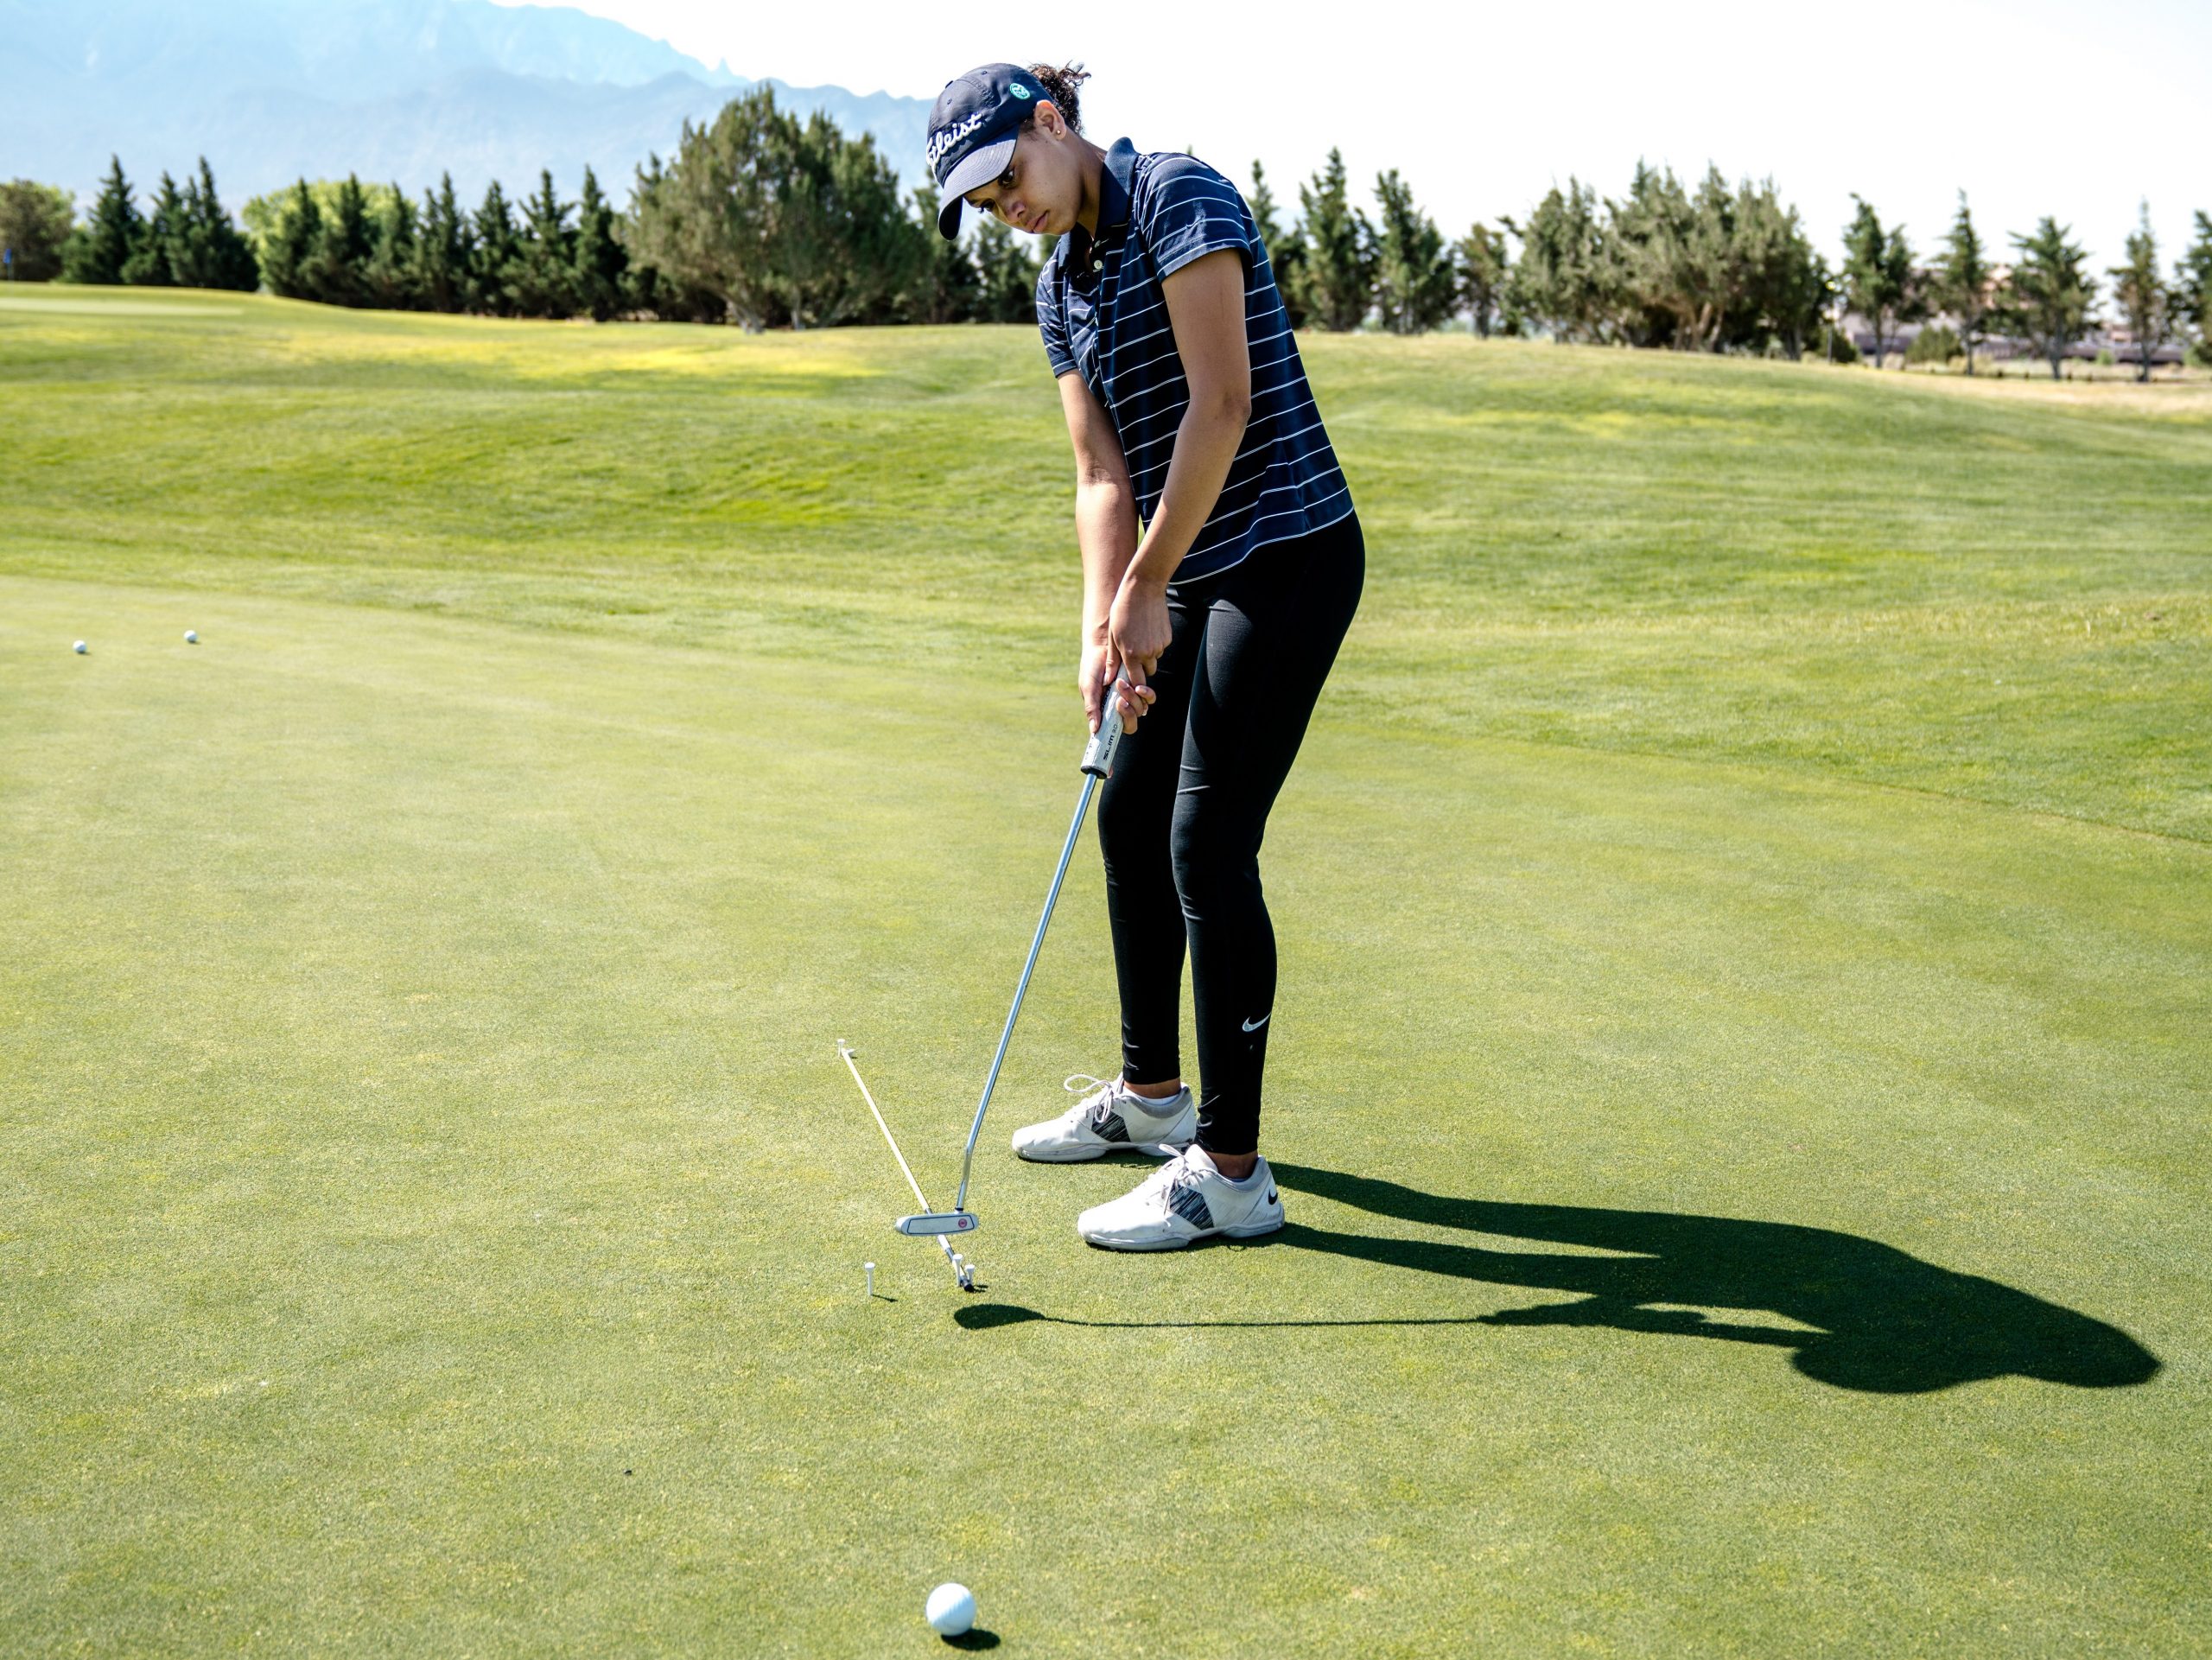 How to Hit a Golf Ball Like a Pro